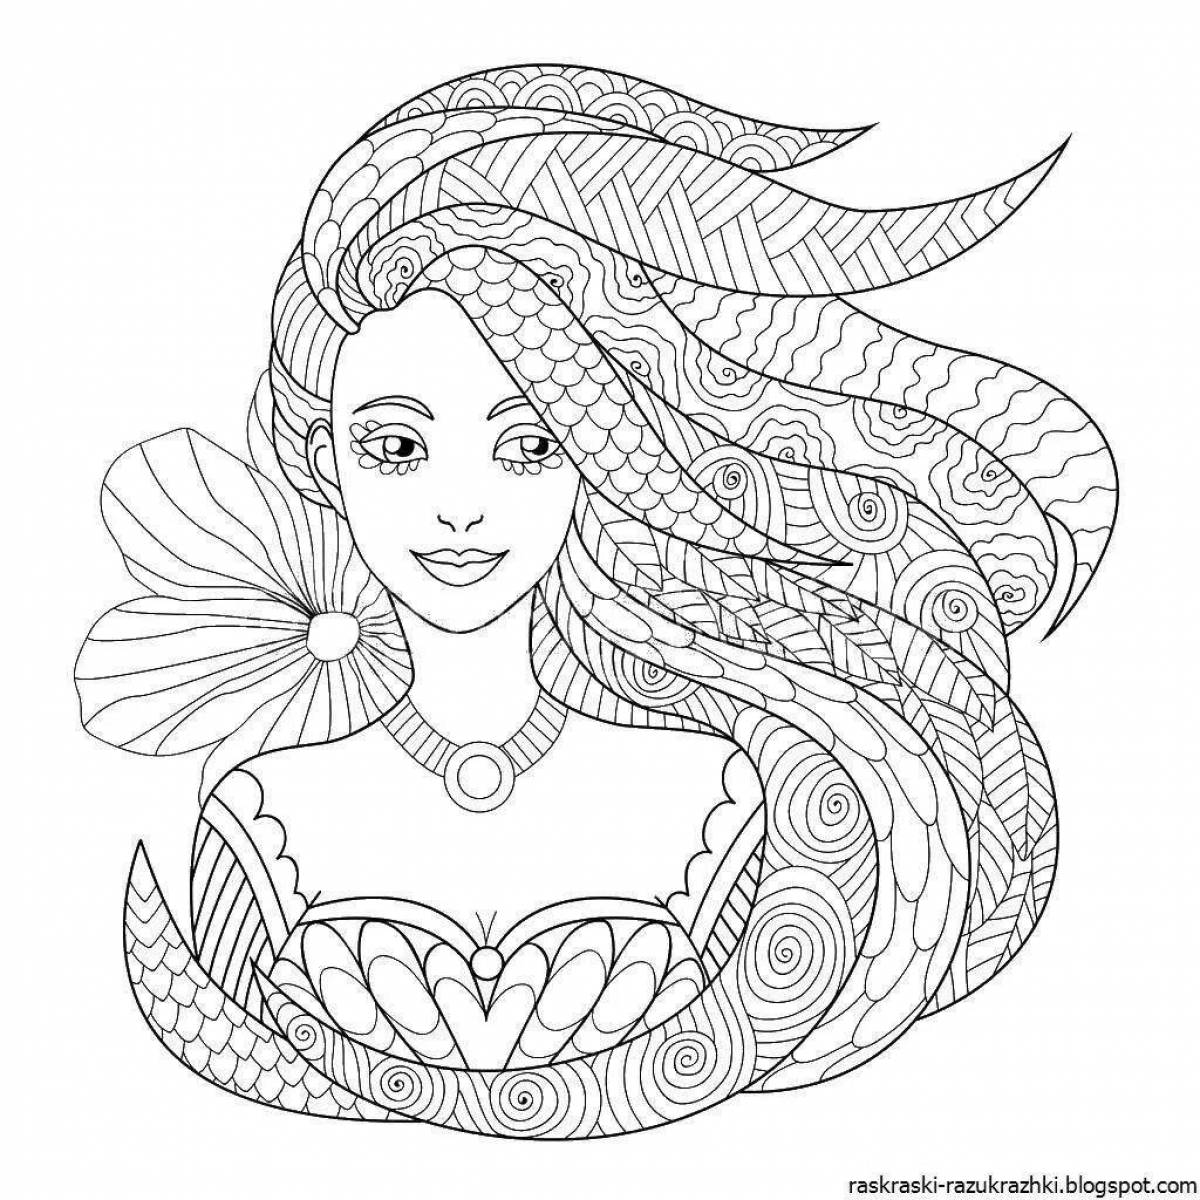 Dazzling anti-stress coloring book for girls 9-10 years old